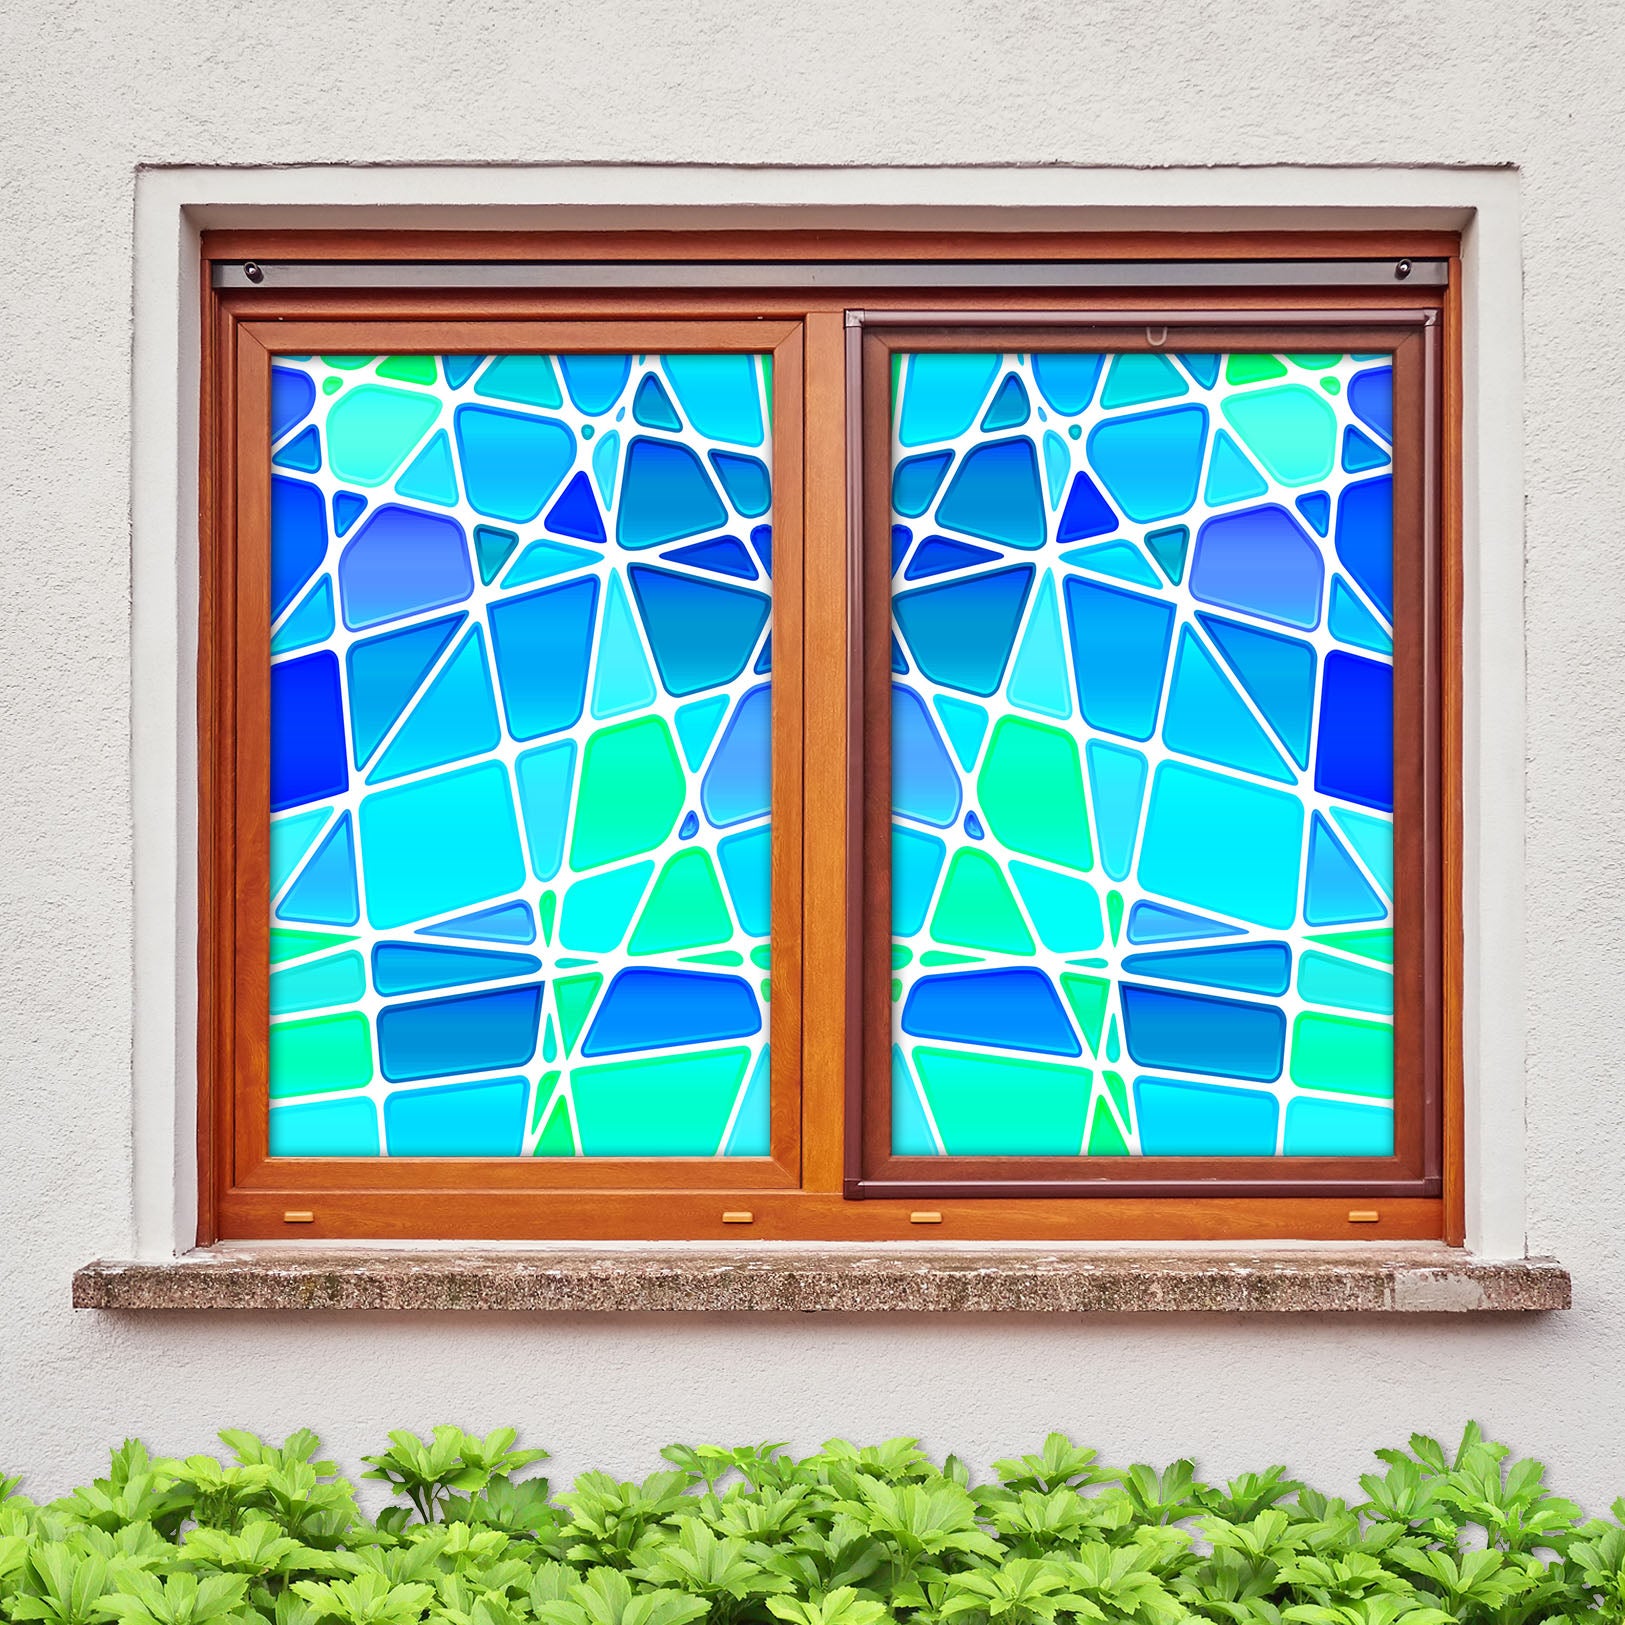 3D Blue Graphic 397 Window Film Print Sticker Cling Stained Glass UV Block